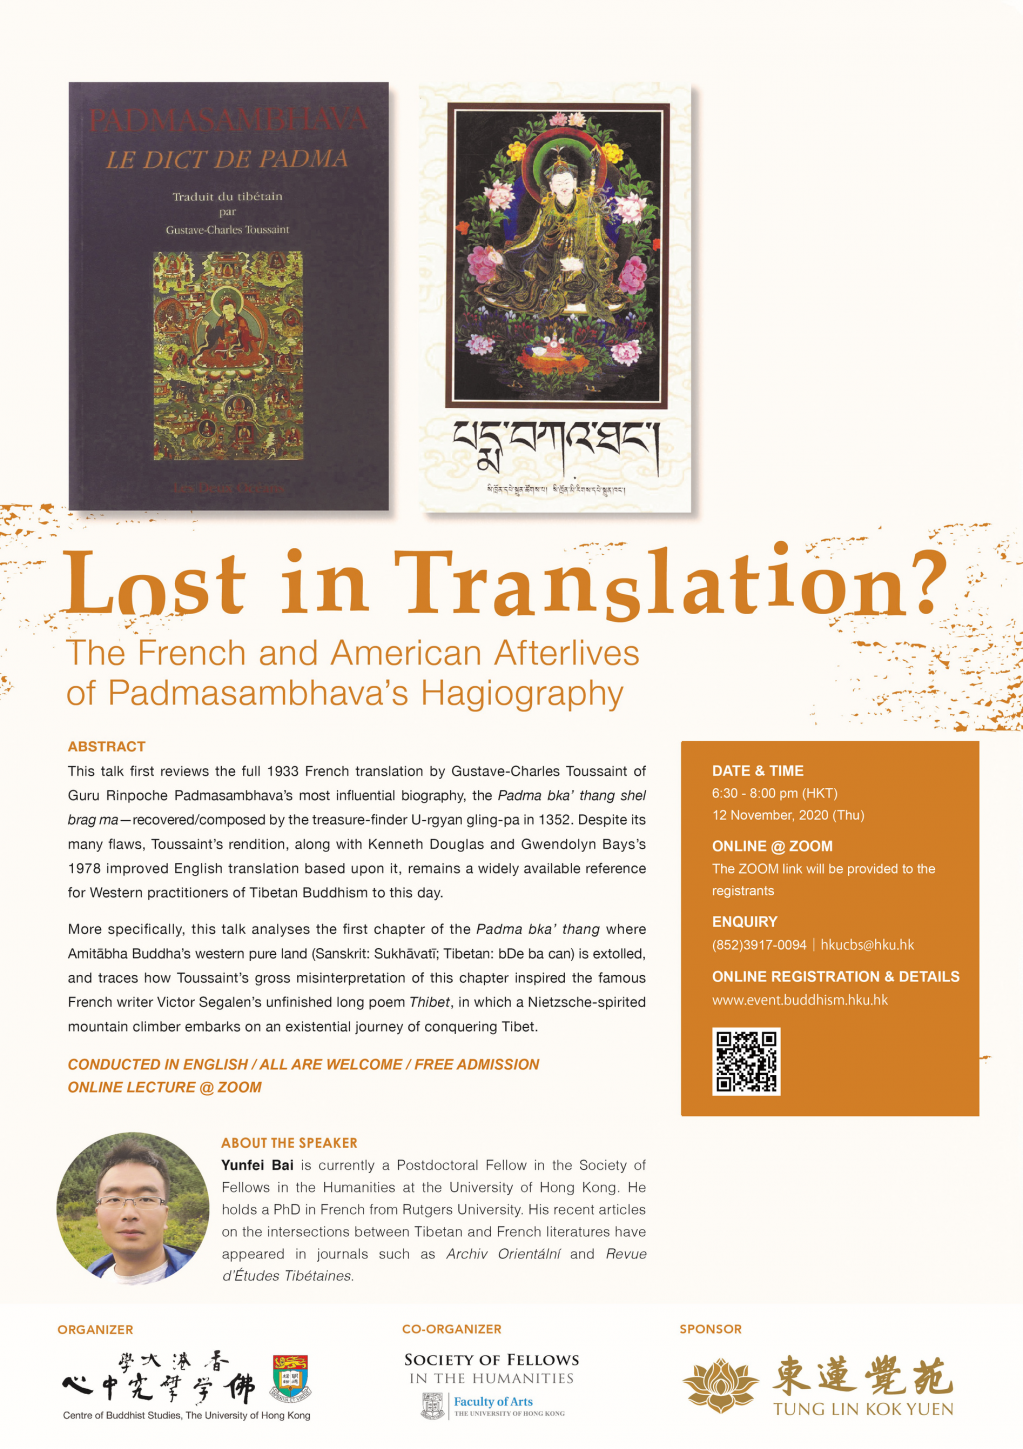 [Nov 12] Lecture by Dr. Yunfei Bai - Lost in Translation? The French and American Afterlives of Padmasambhava's Hagiography